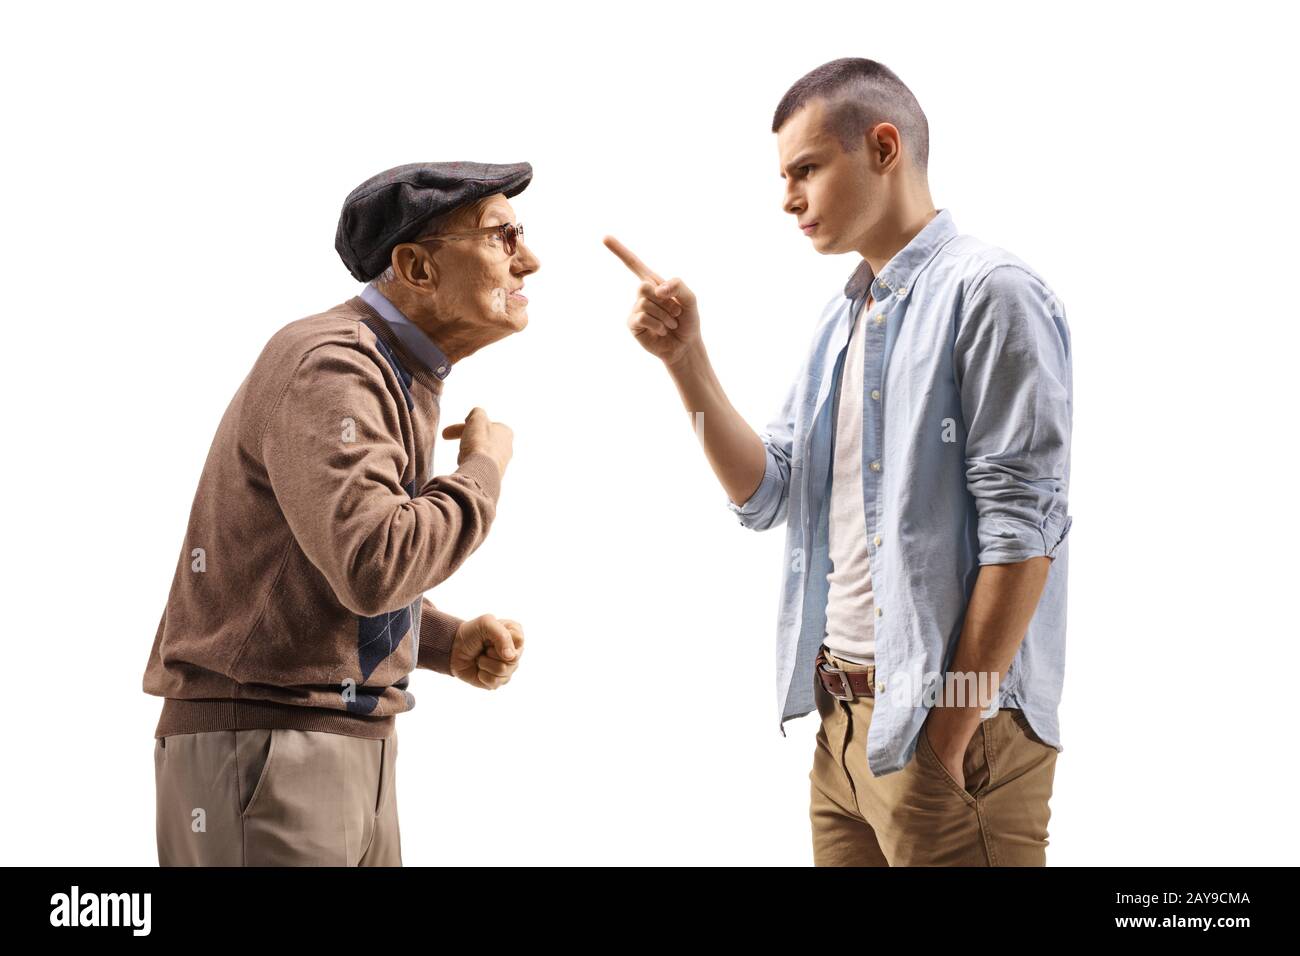 Young guy threatening to a senior man isolated on white background Stock Photo